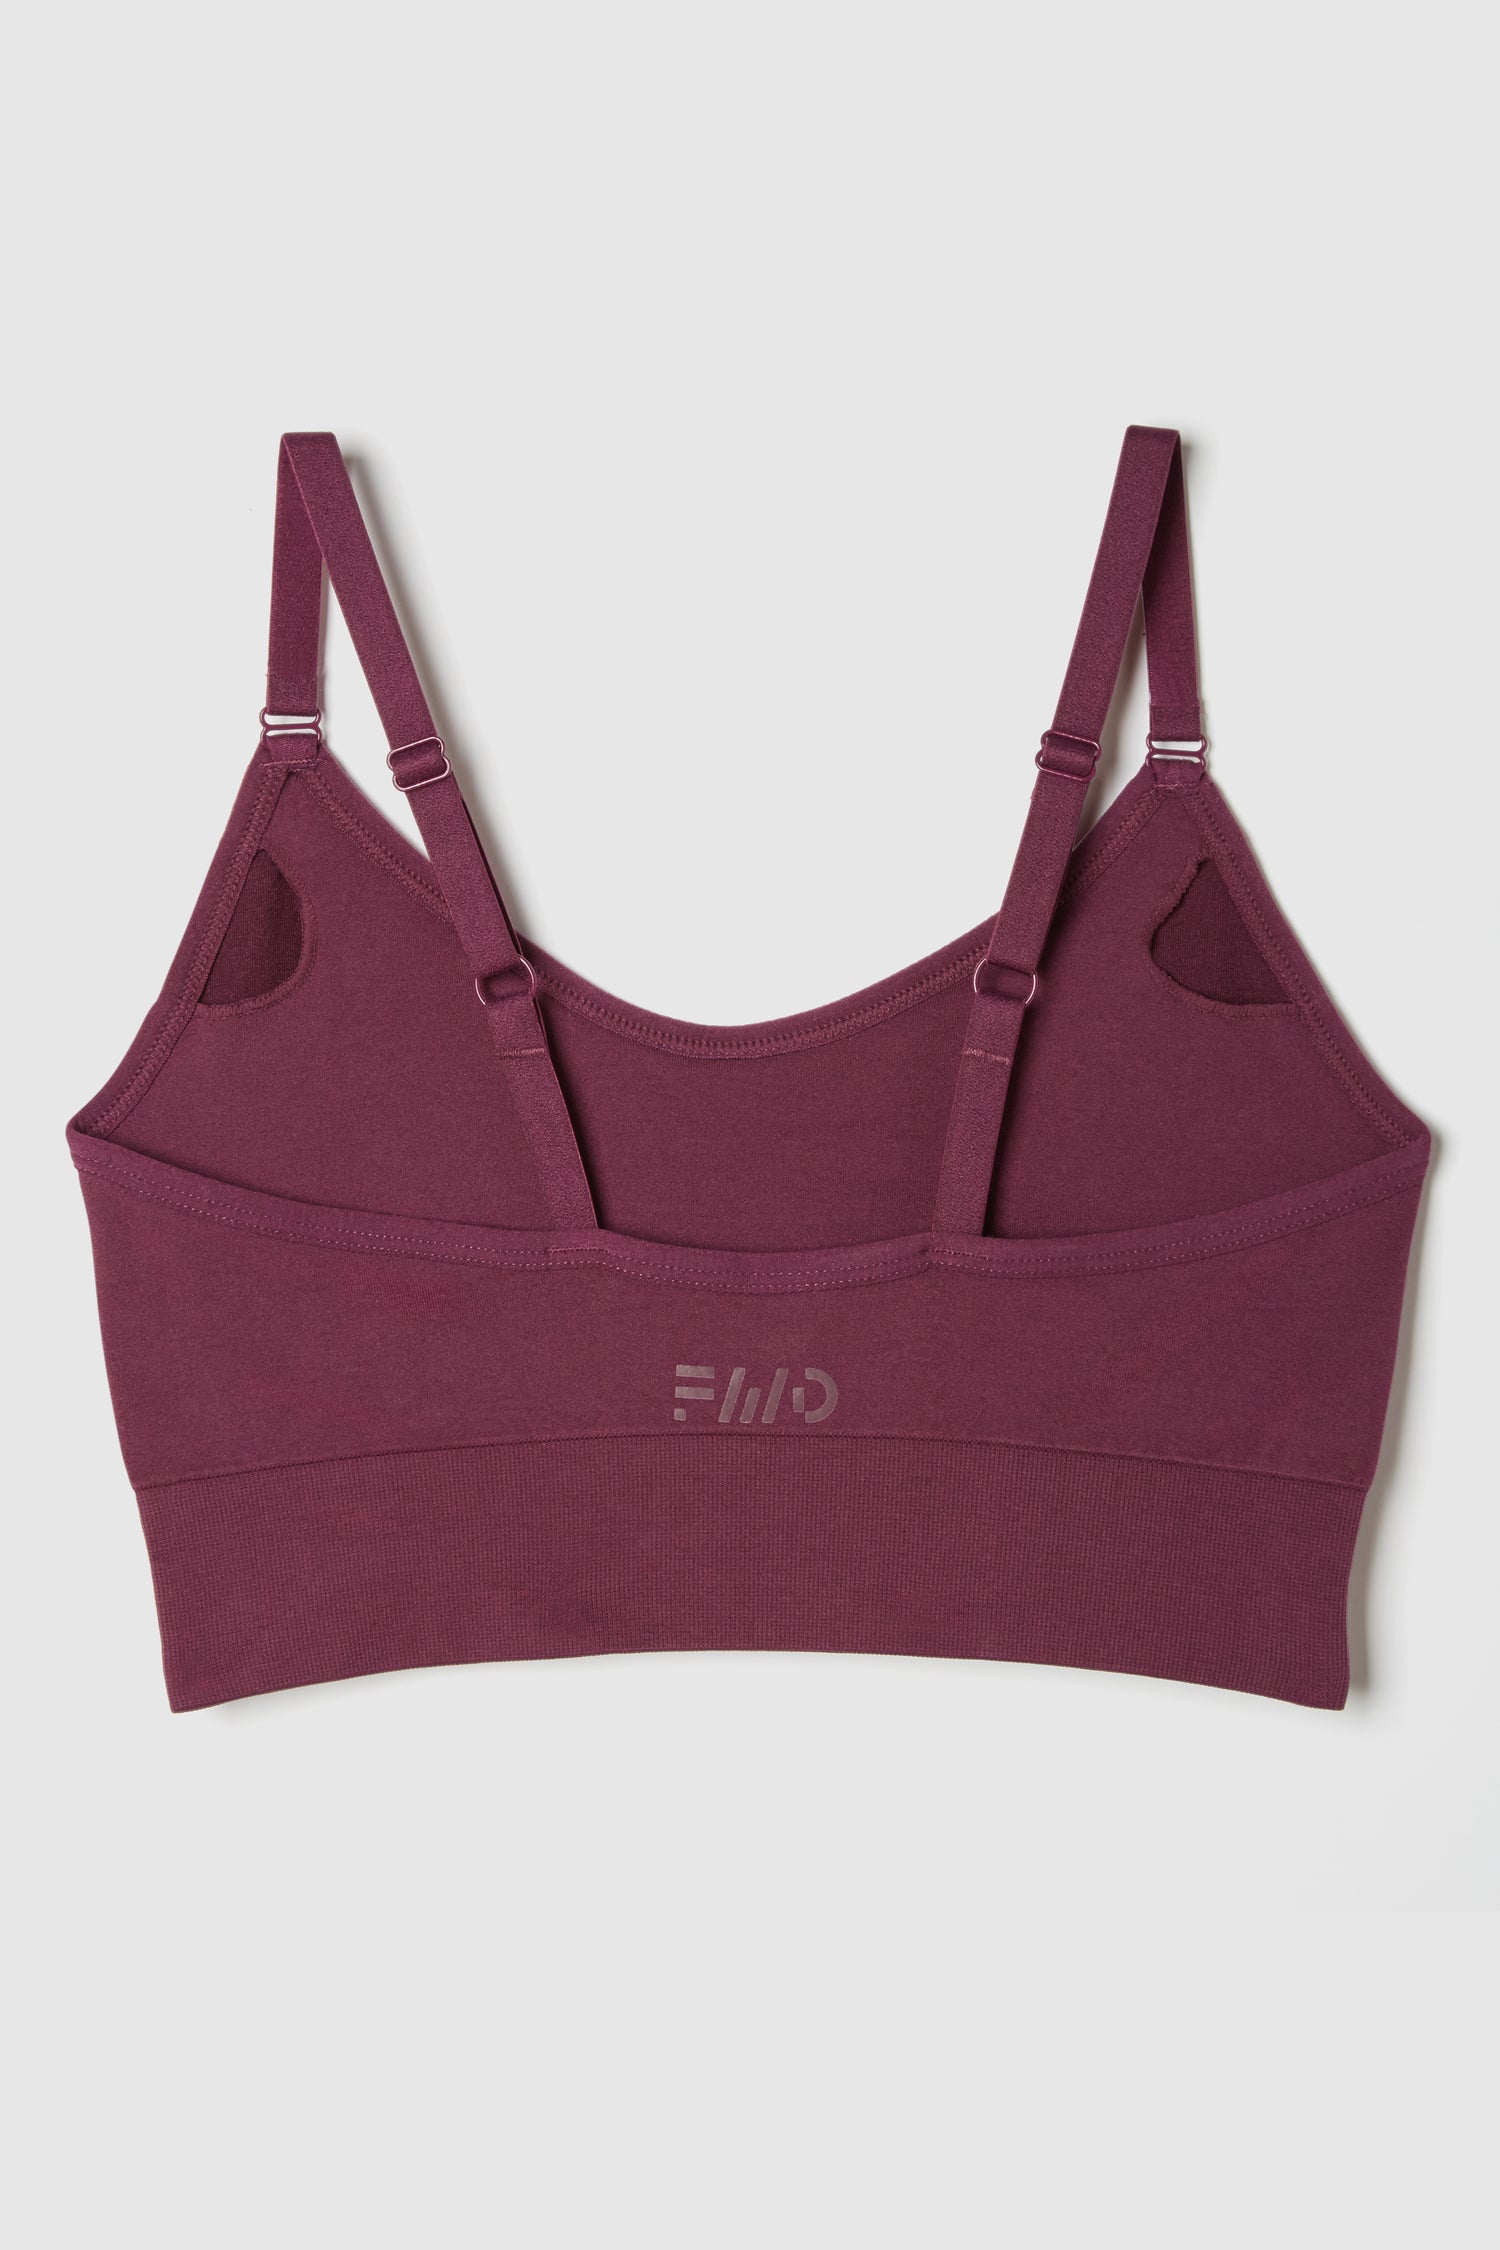 FWD Women's Seamless Sports Bra, Low Impact, Removable Pads - BEST SELLING